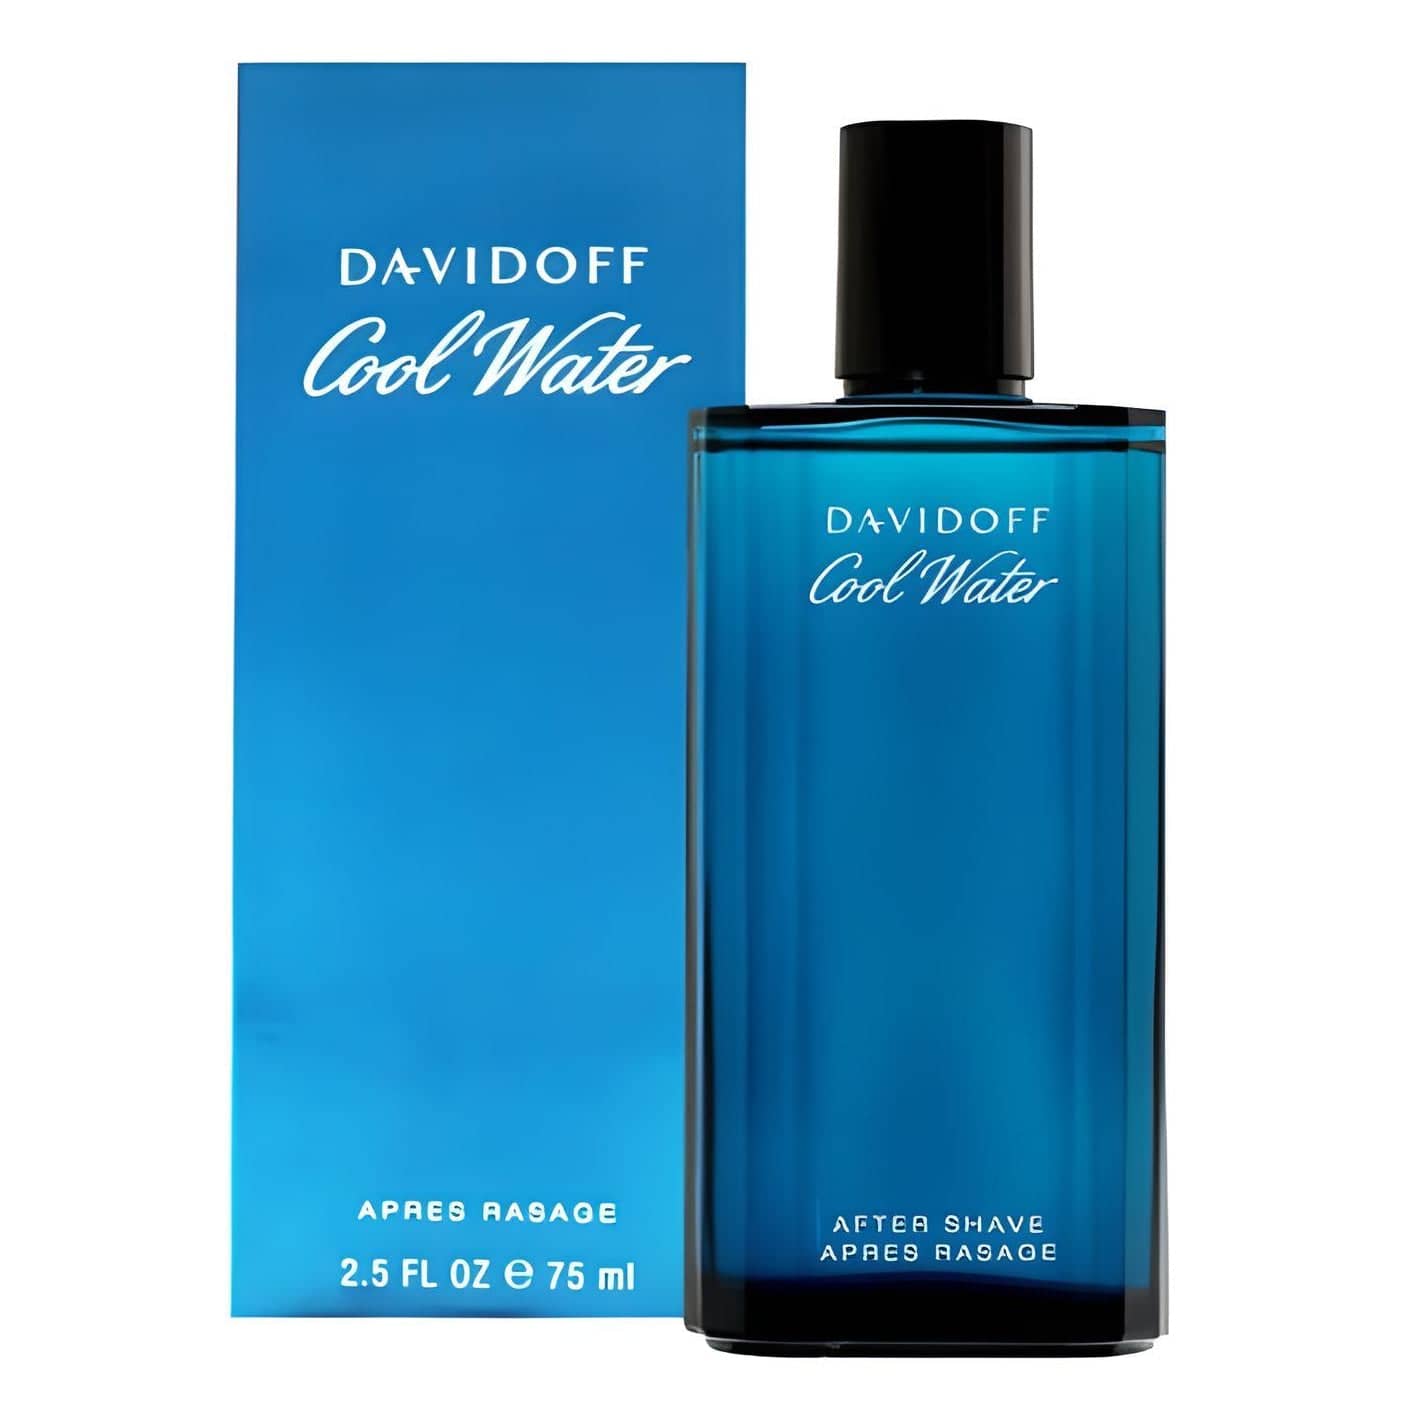 COOL WATER After Shave After Shave DAVIDOFF   